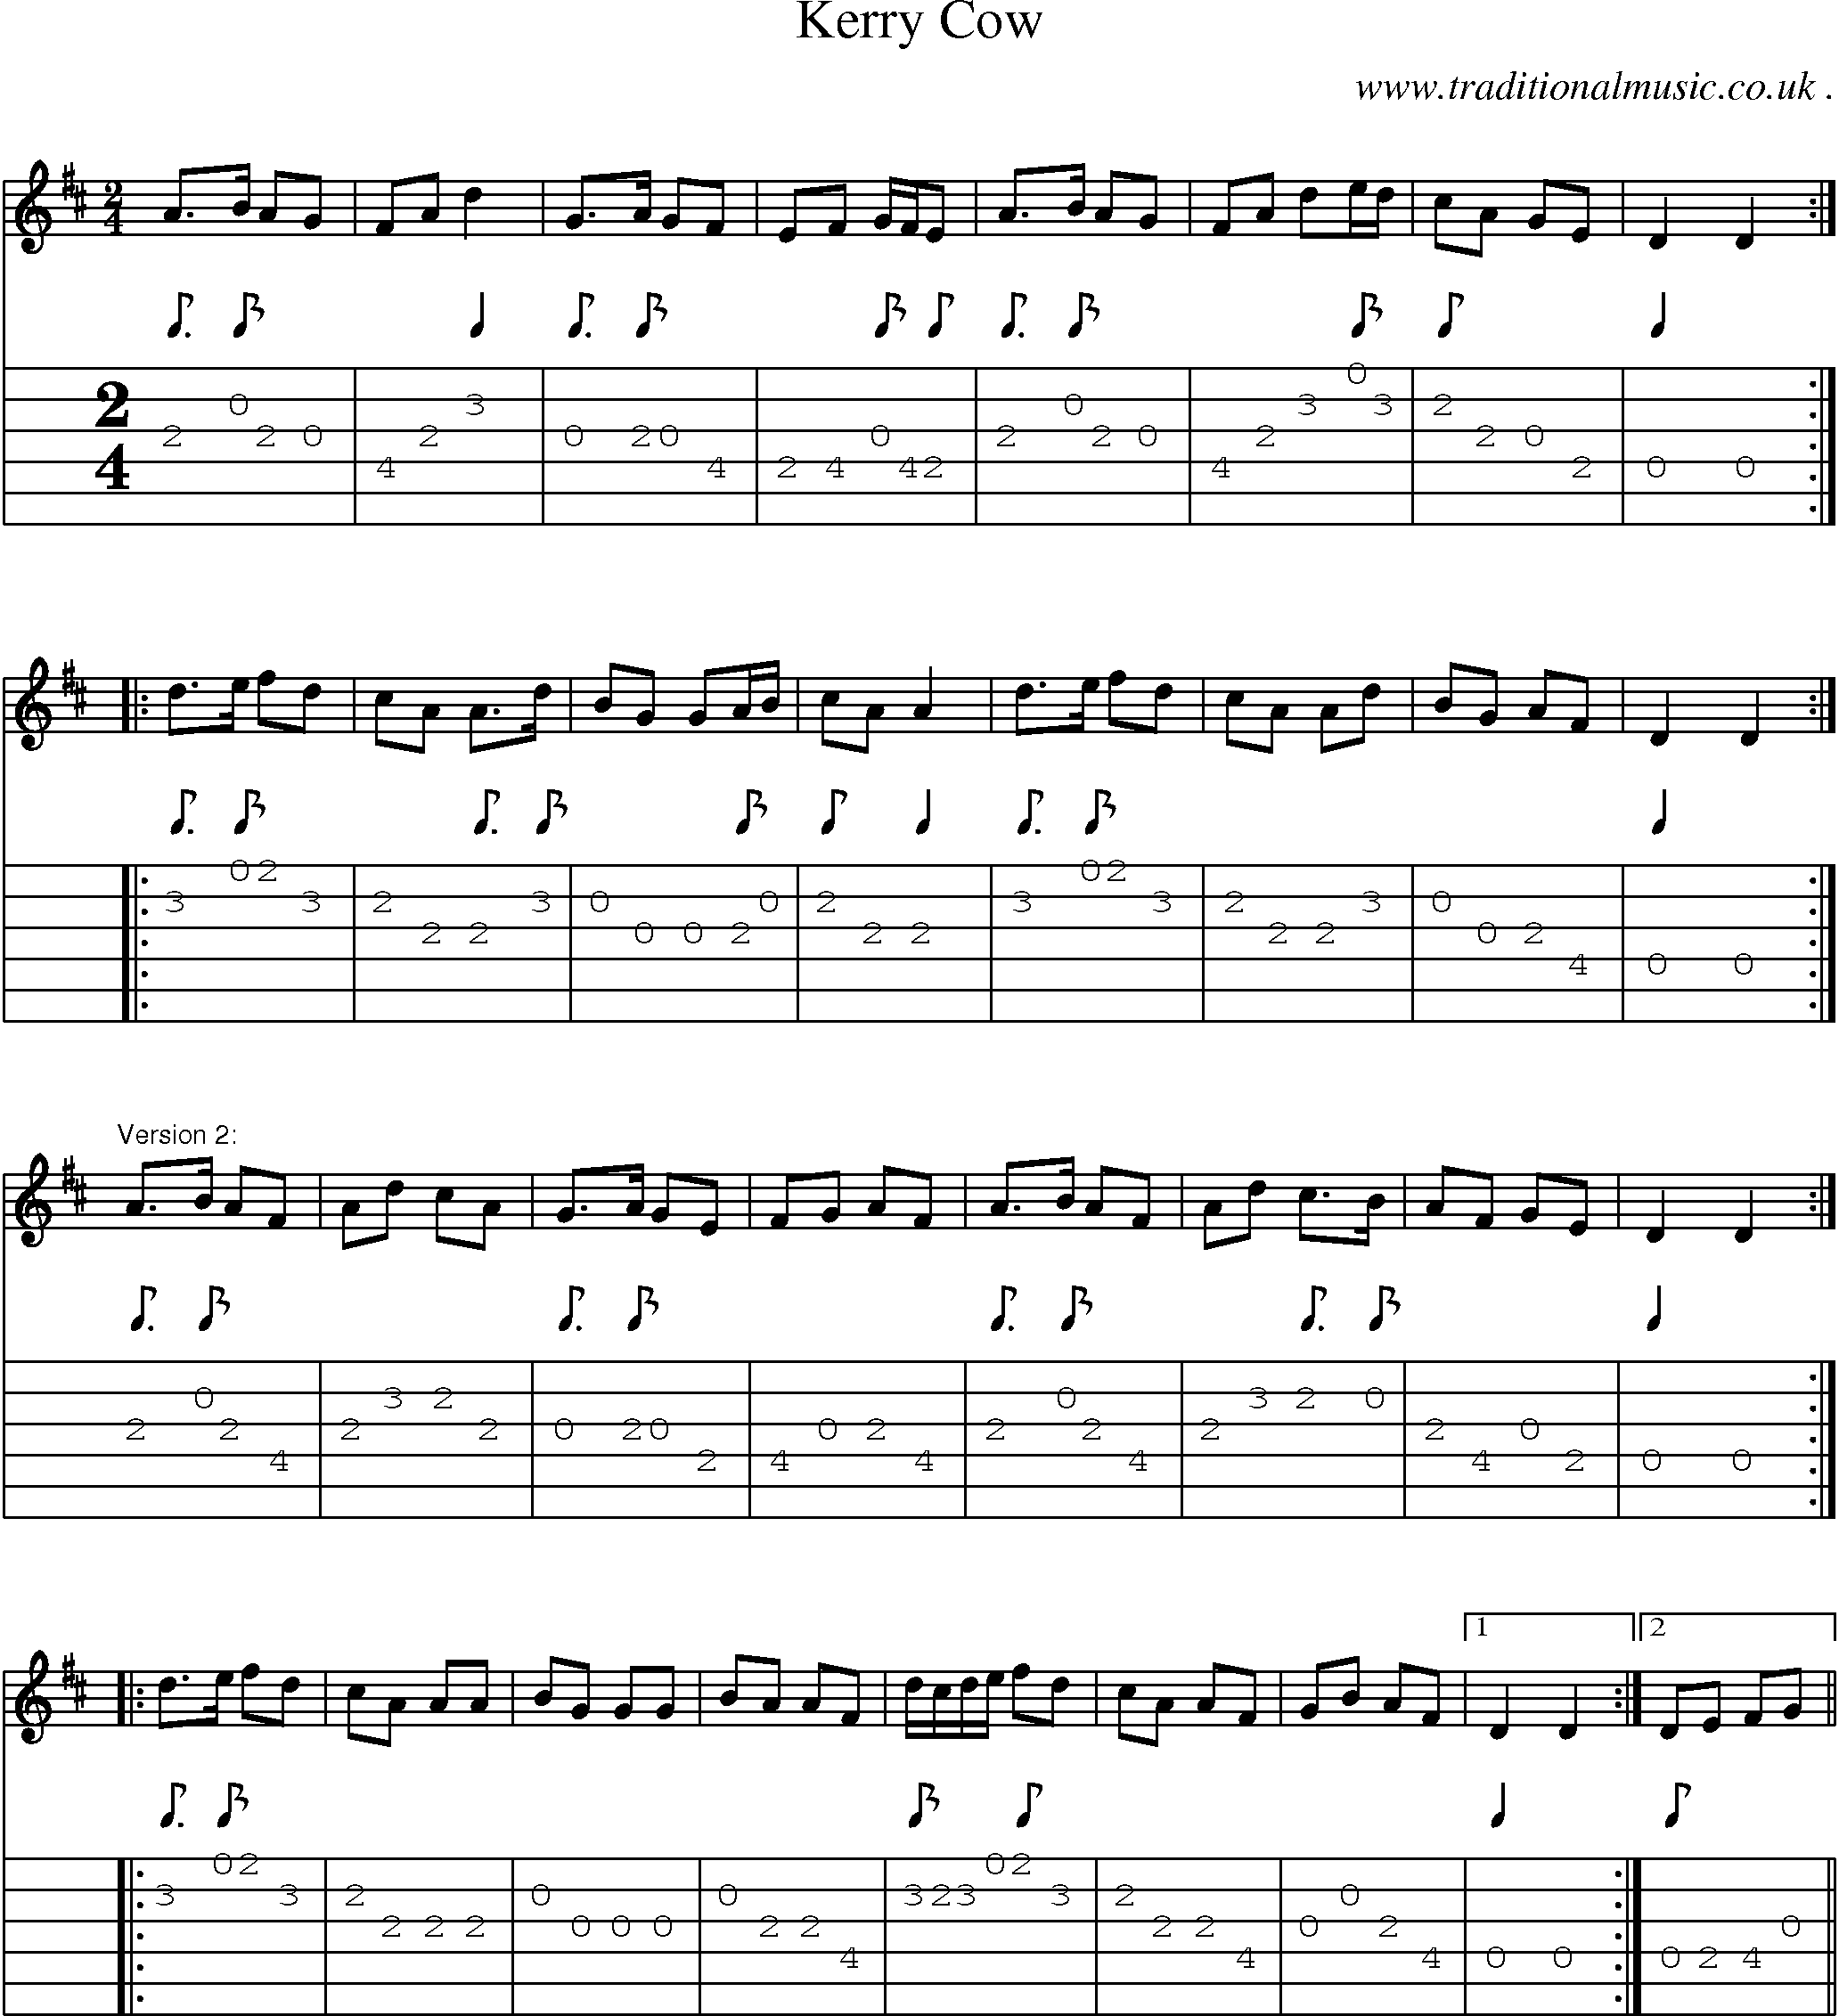 Sheet-Music and Guitar Tabs for Kerry Cow